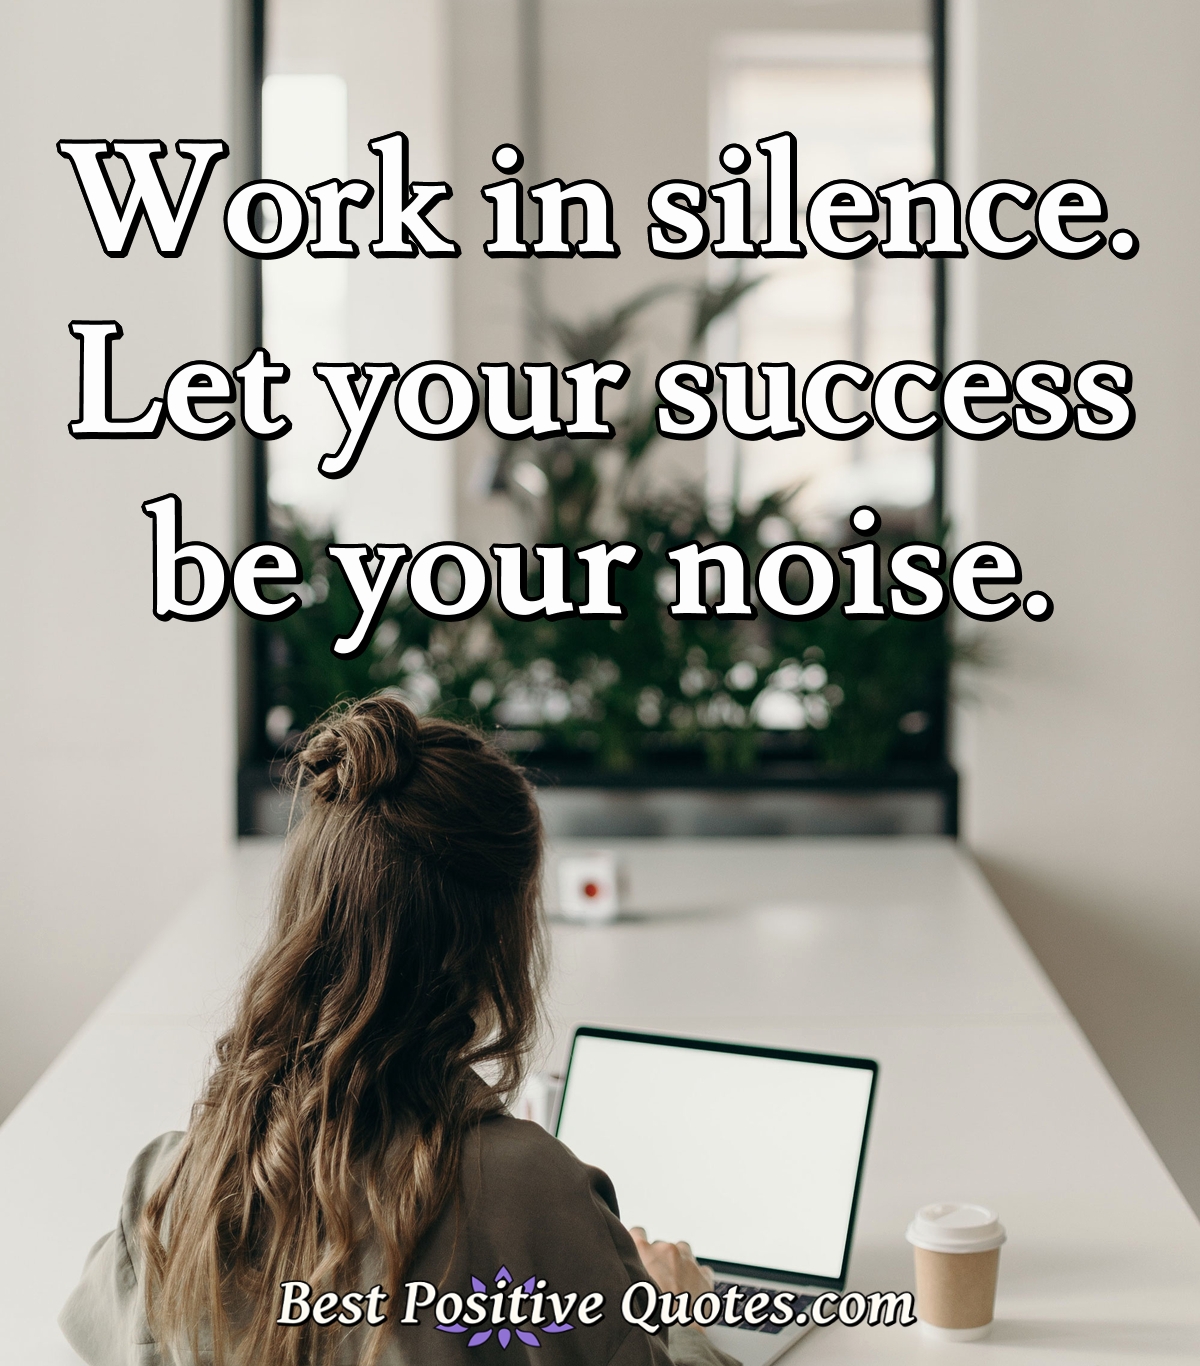 Work in silence. Let your success be your noise. - Anonymous